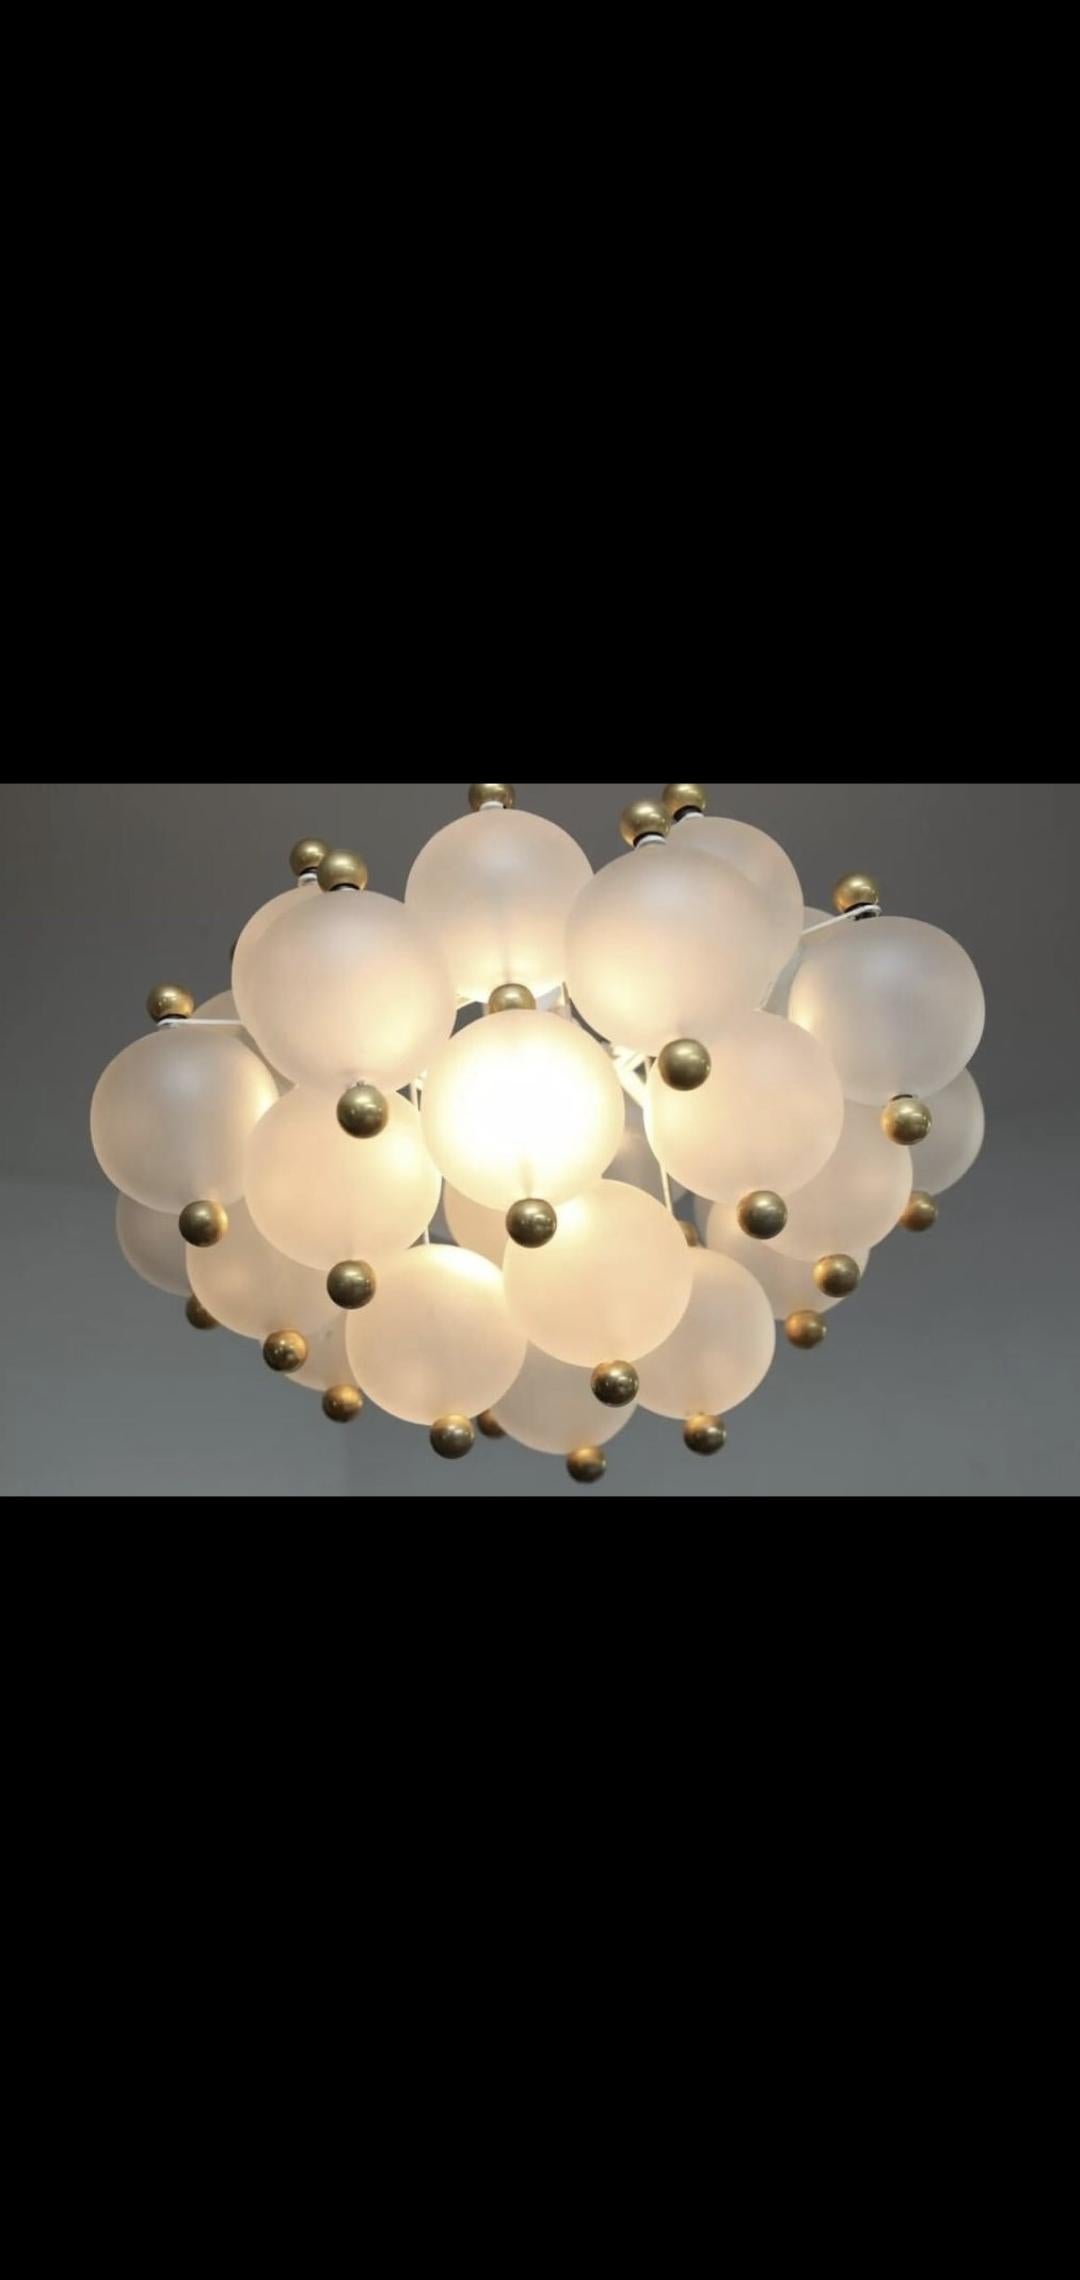 Mid-20th Century Kinkedley Ceiling Light made of Frosted Glass Balls with Brass Ball Finials